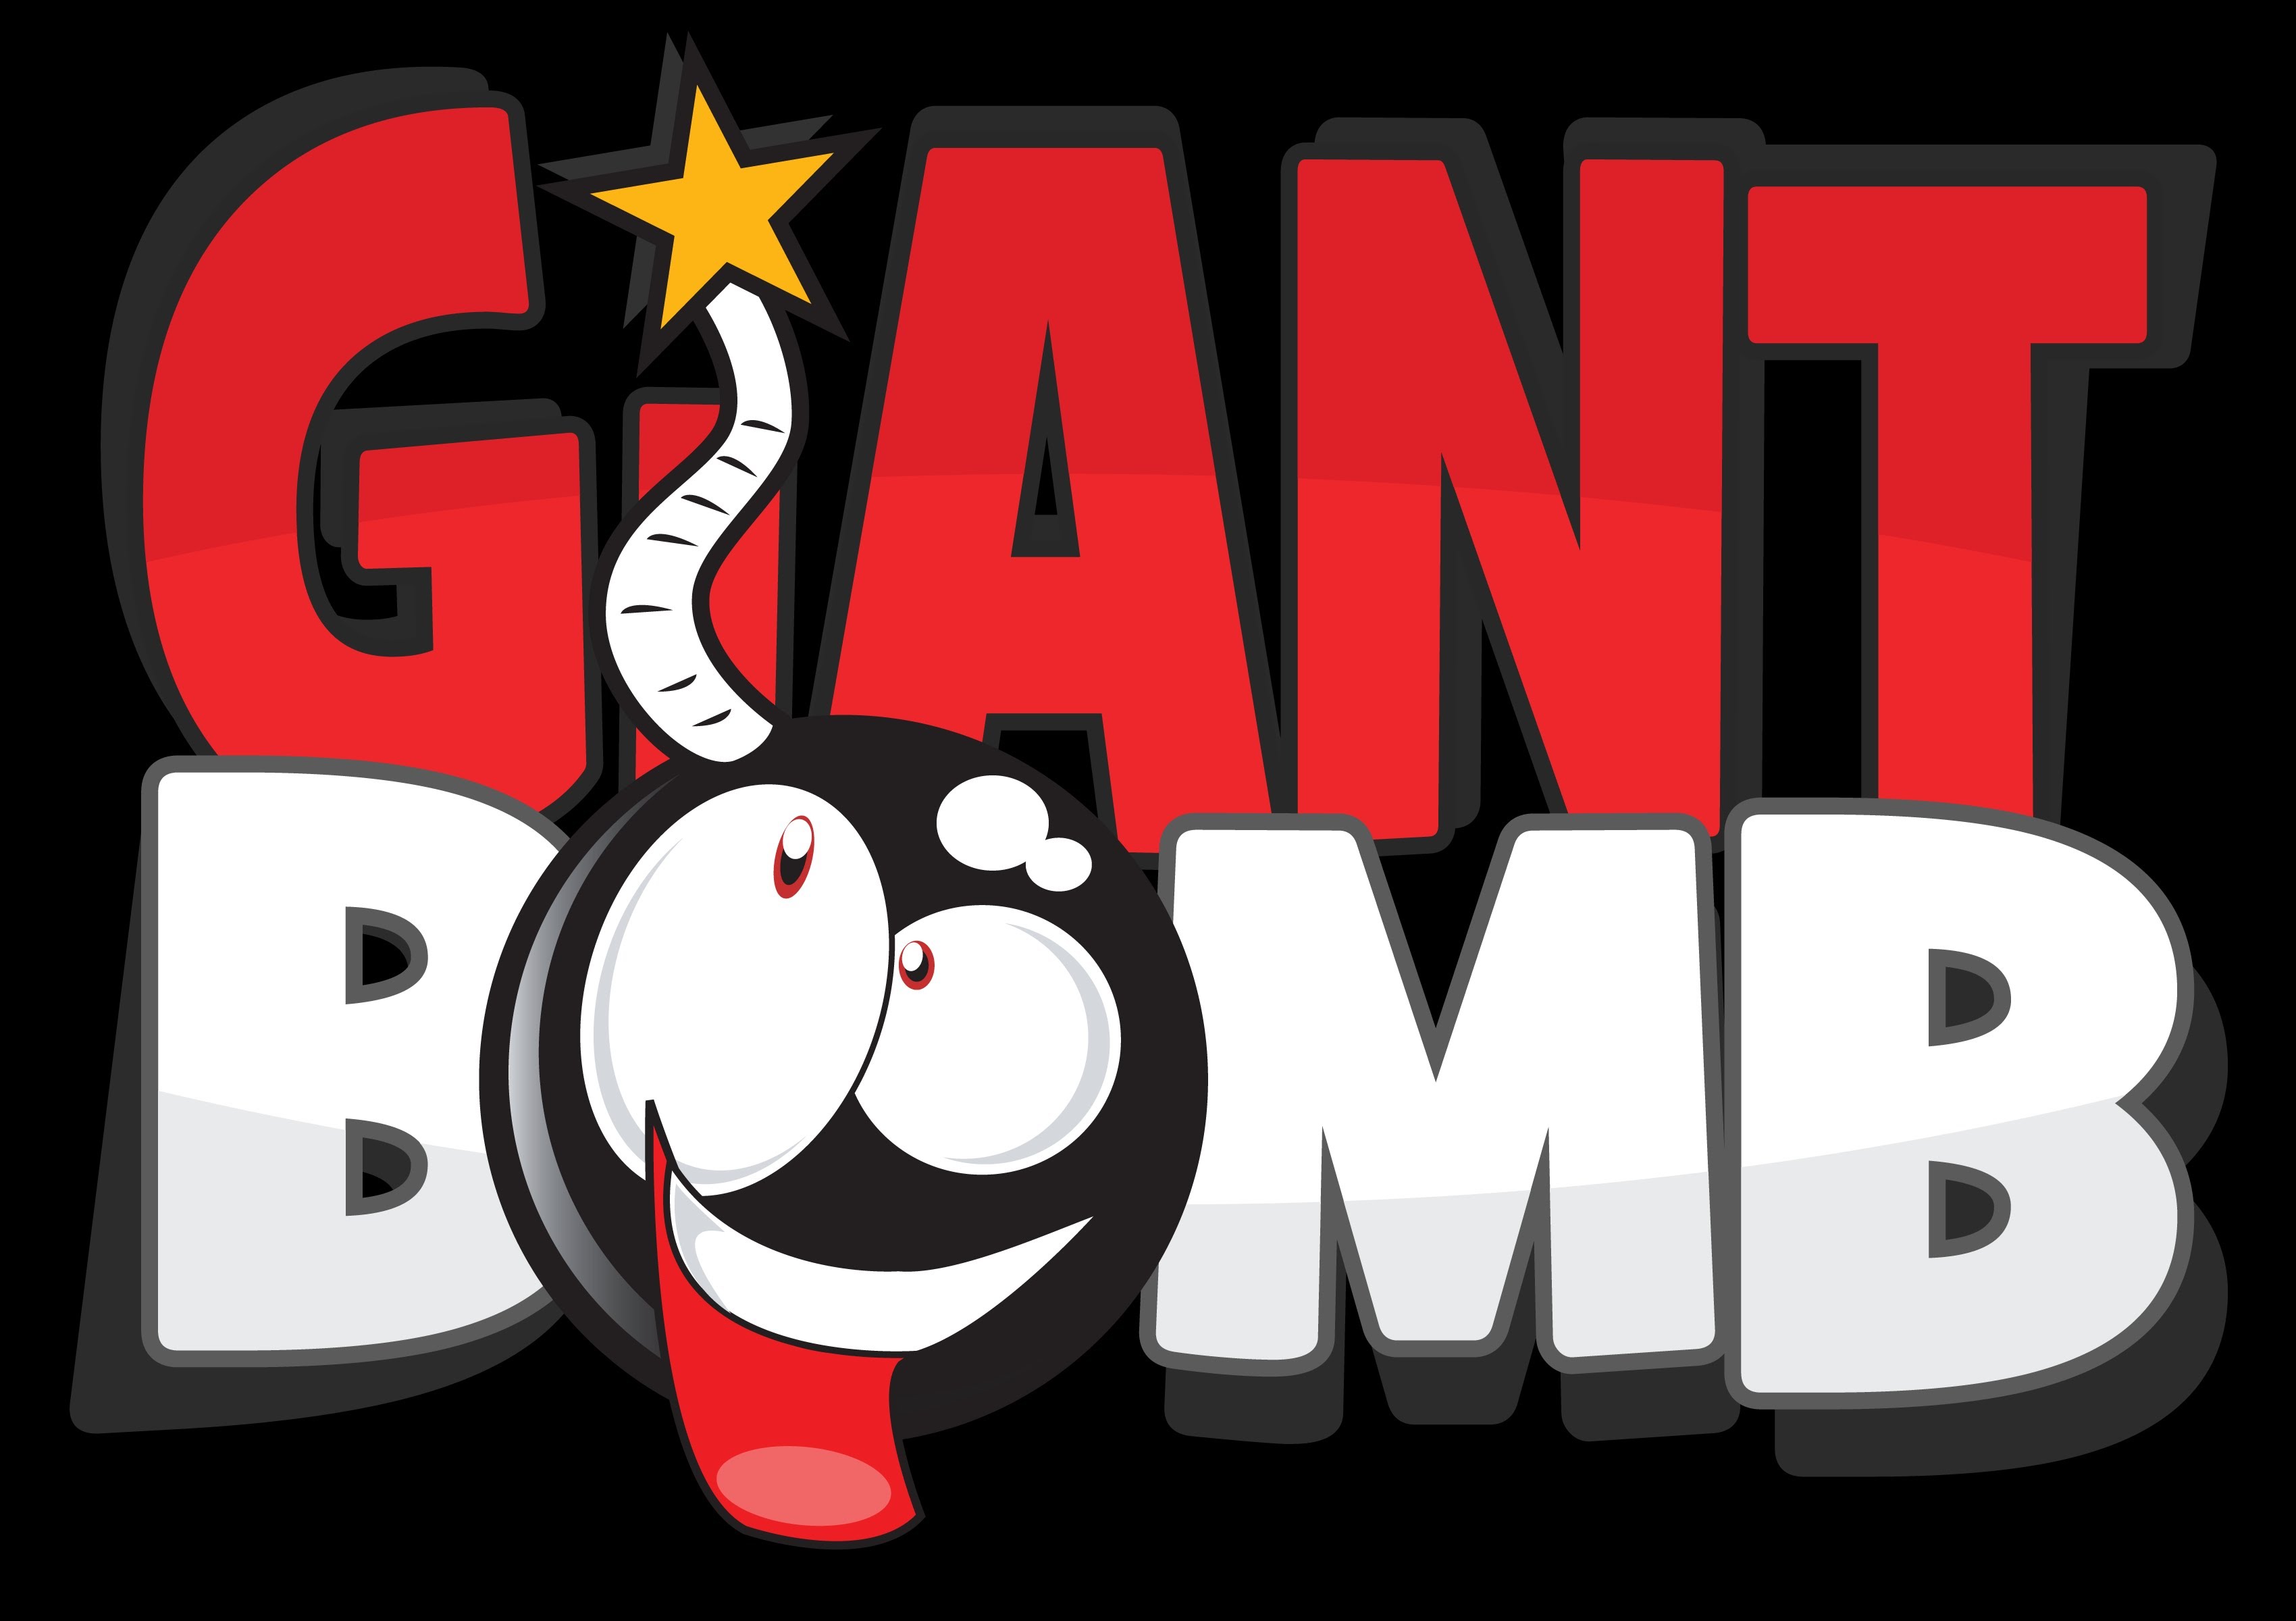 Giant Bomb. Kinda funny games. Fun and games. Games: super Funky Punky. Let s hear